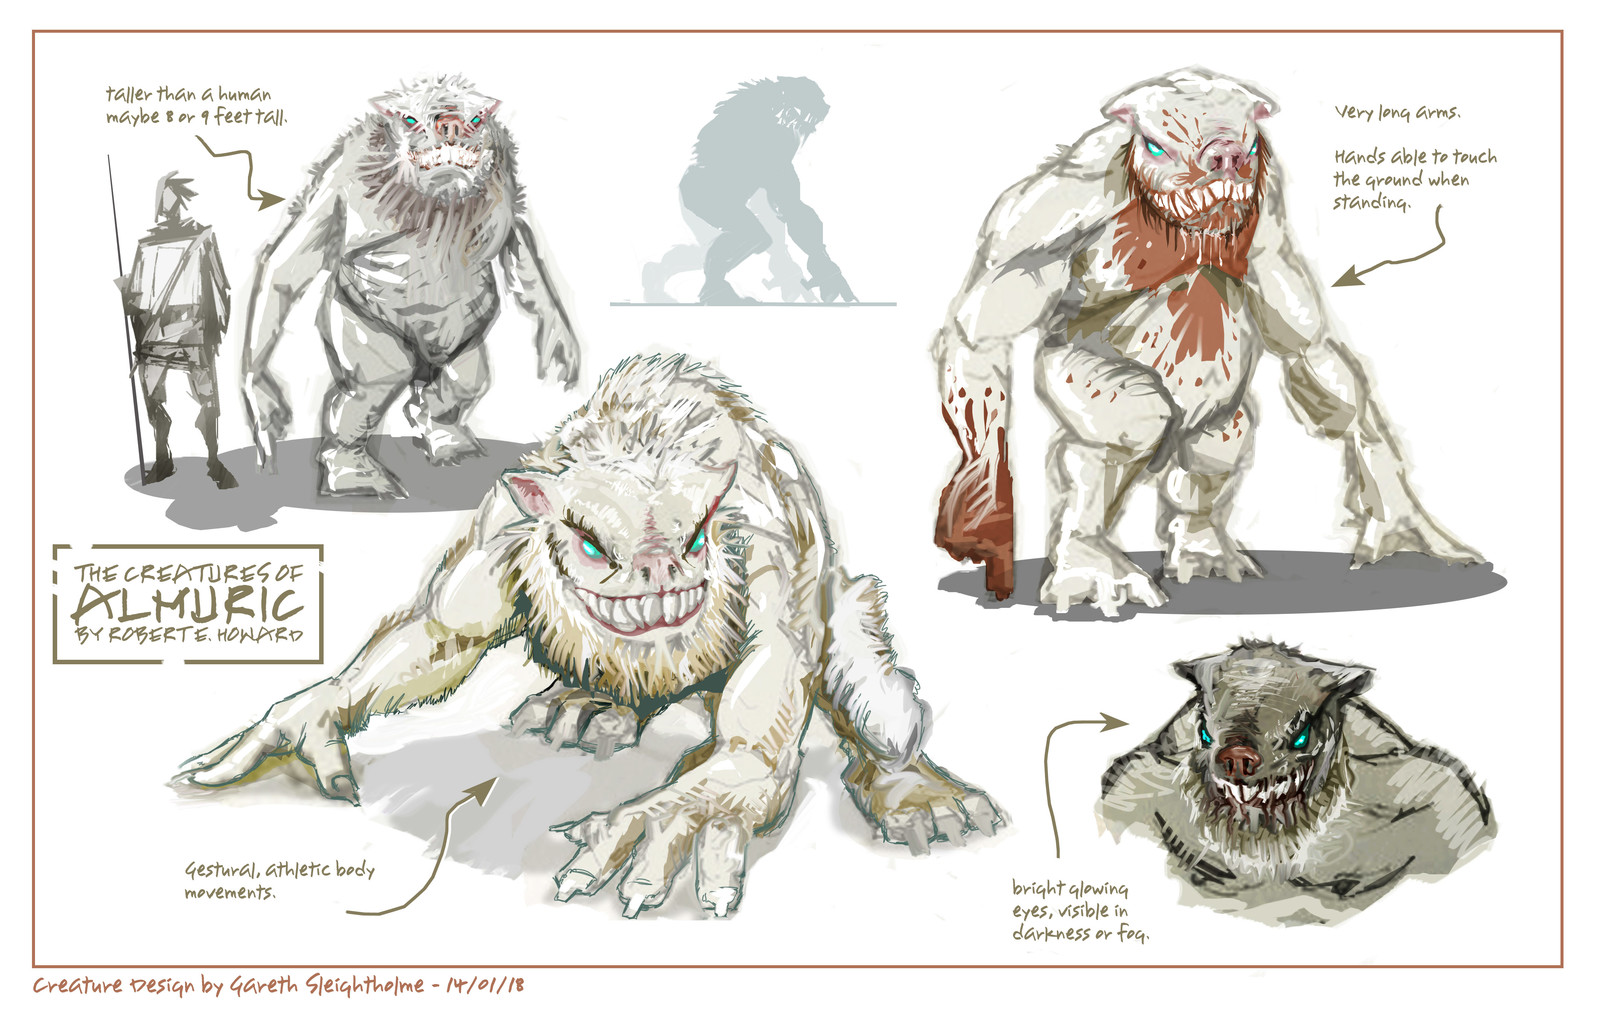 A creature from Robert E. Howard's Almuric. - beasts described as having bodies like "deformed apes, covered with sparse dirty white fur. Their heads were doglike, with small close-set ears. But their eyes were those of serpents..."